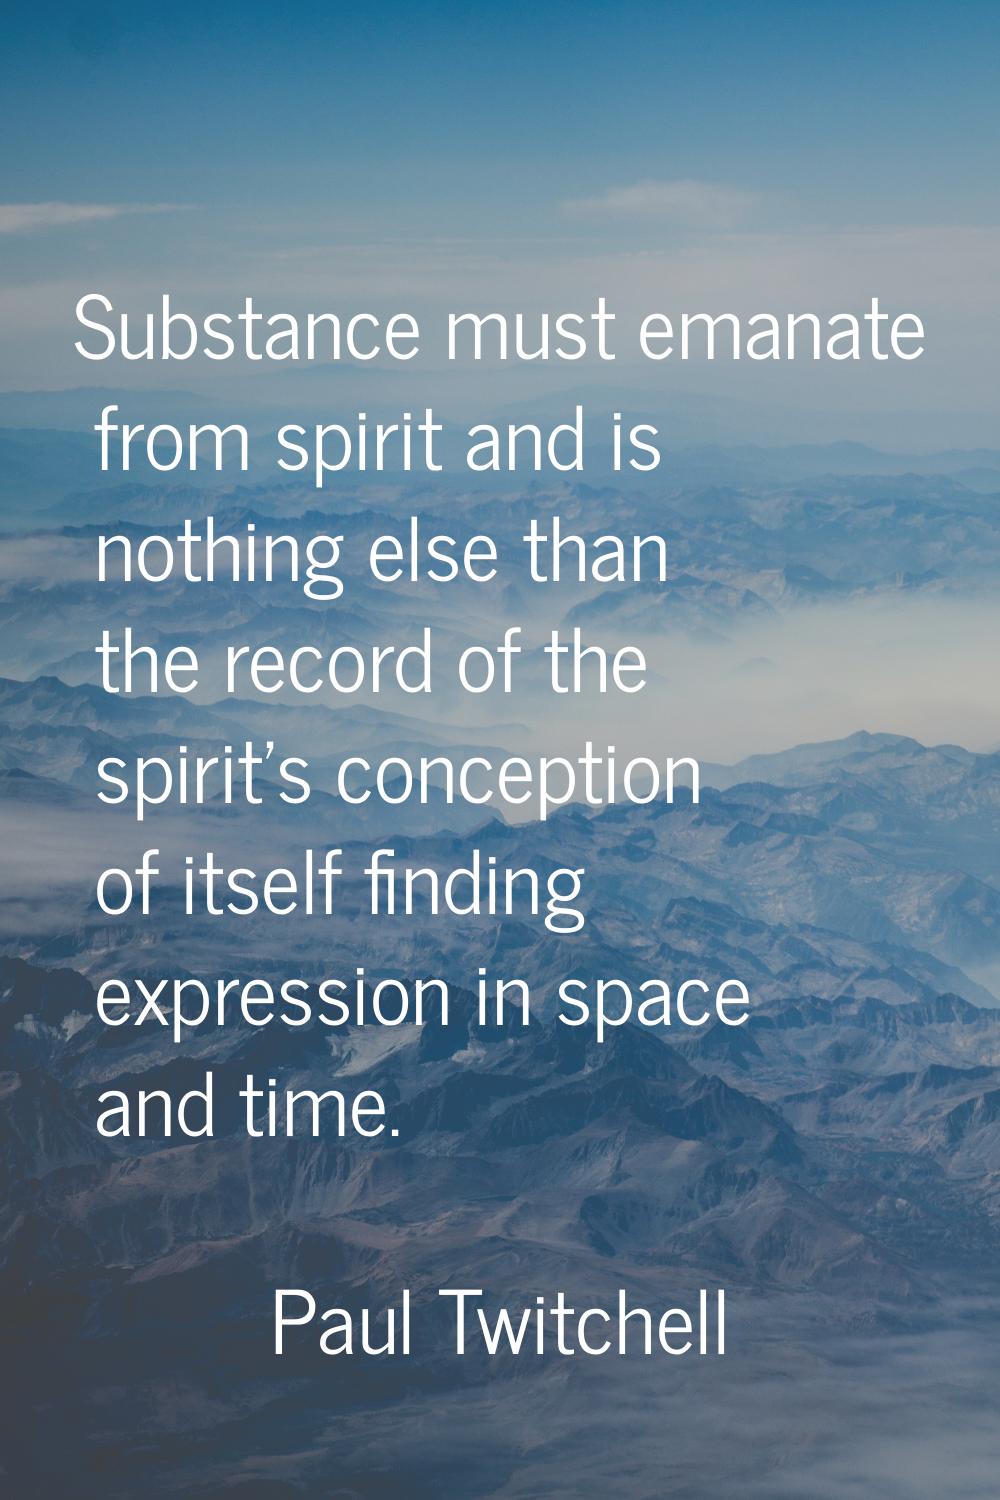 Substance must emanate from spirit and is nothing else than the record of the spirit's conception o